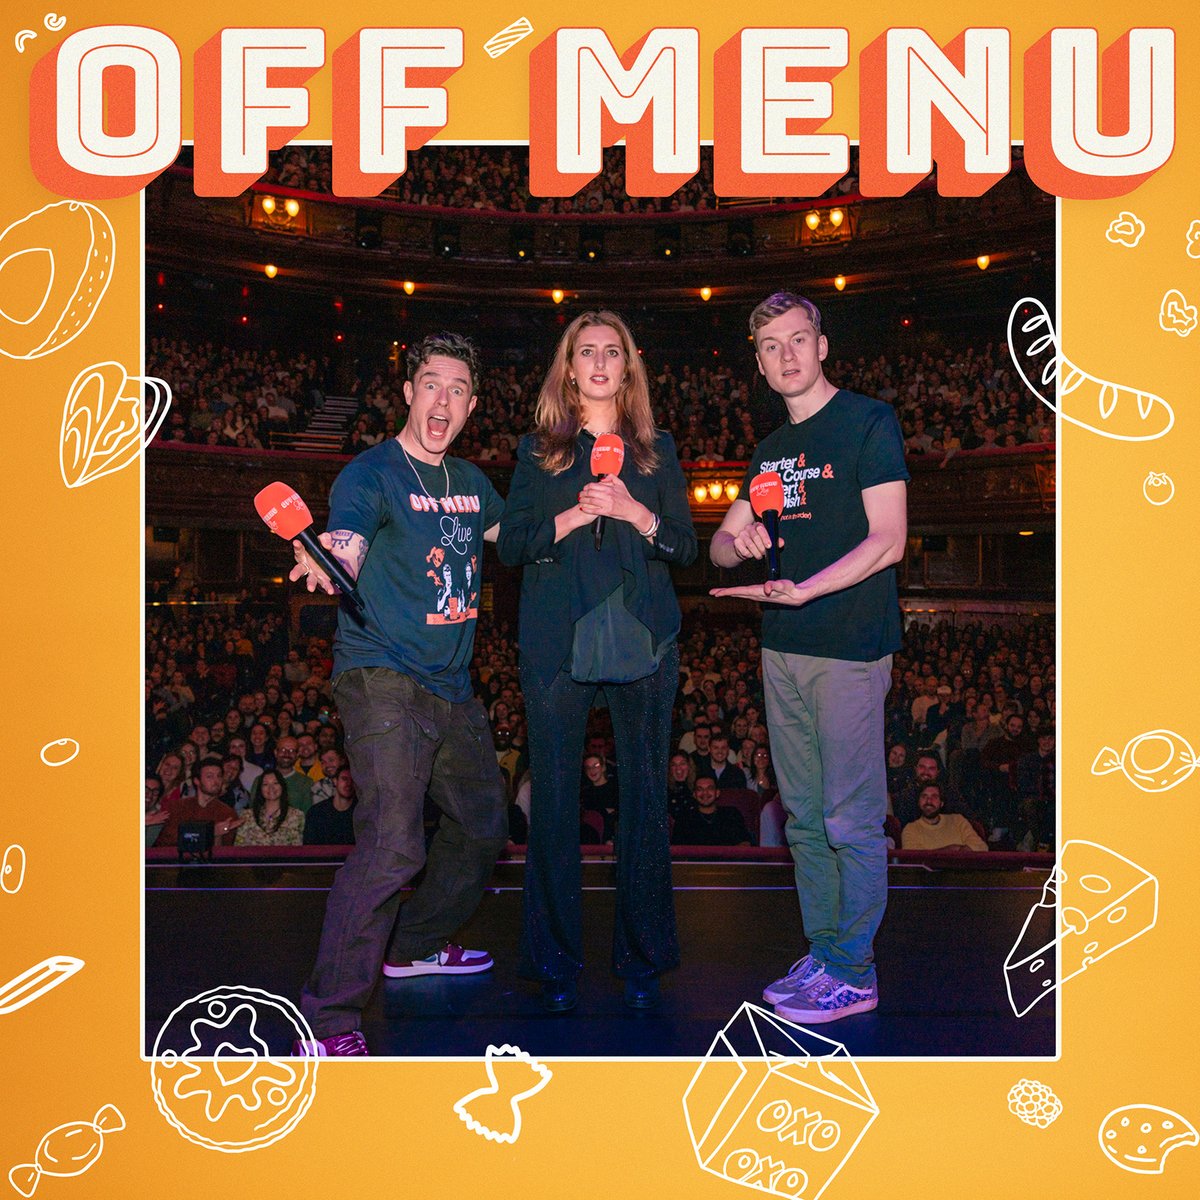 New episode of... 🧞‍♂️🍽 Off Menu 🍽🧞‍♂️ with Ed Gamble and James Acaster and special guest... Jessica Knappett! Live in London 🍽️ Apple: apple.co/4aKQqJ0 🍽️ Spotify: open.spotify.com/episode/4ACITr…